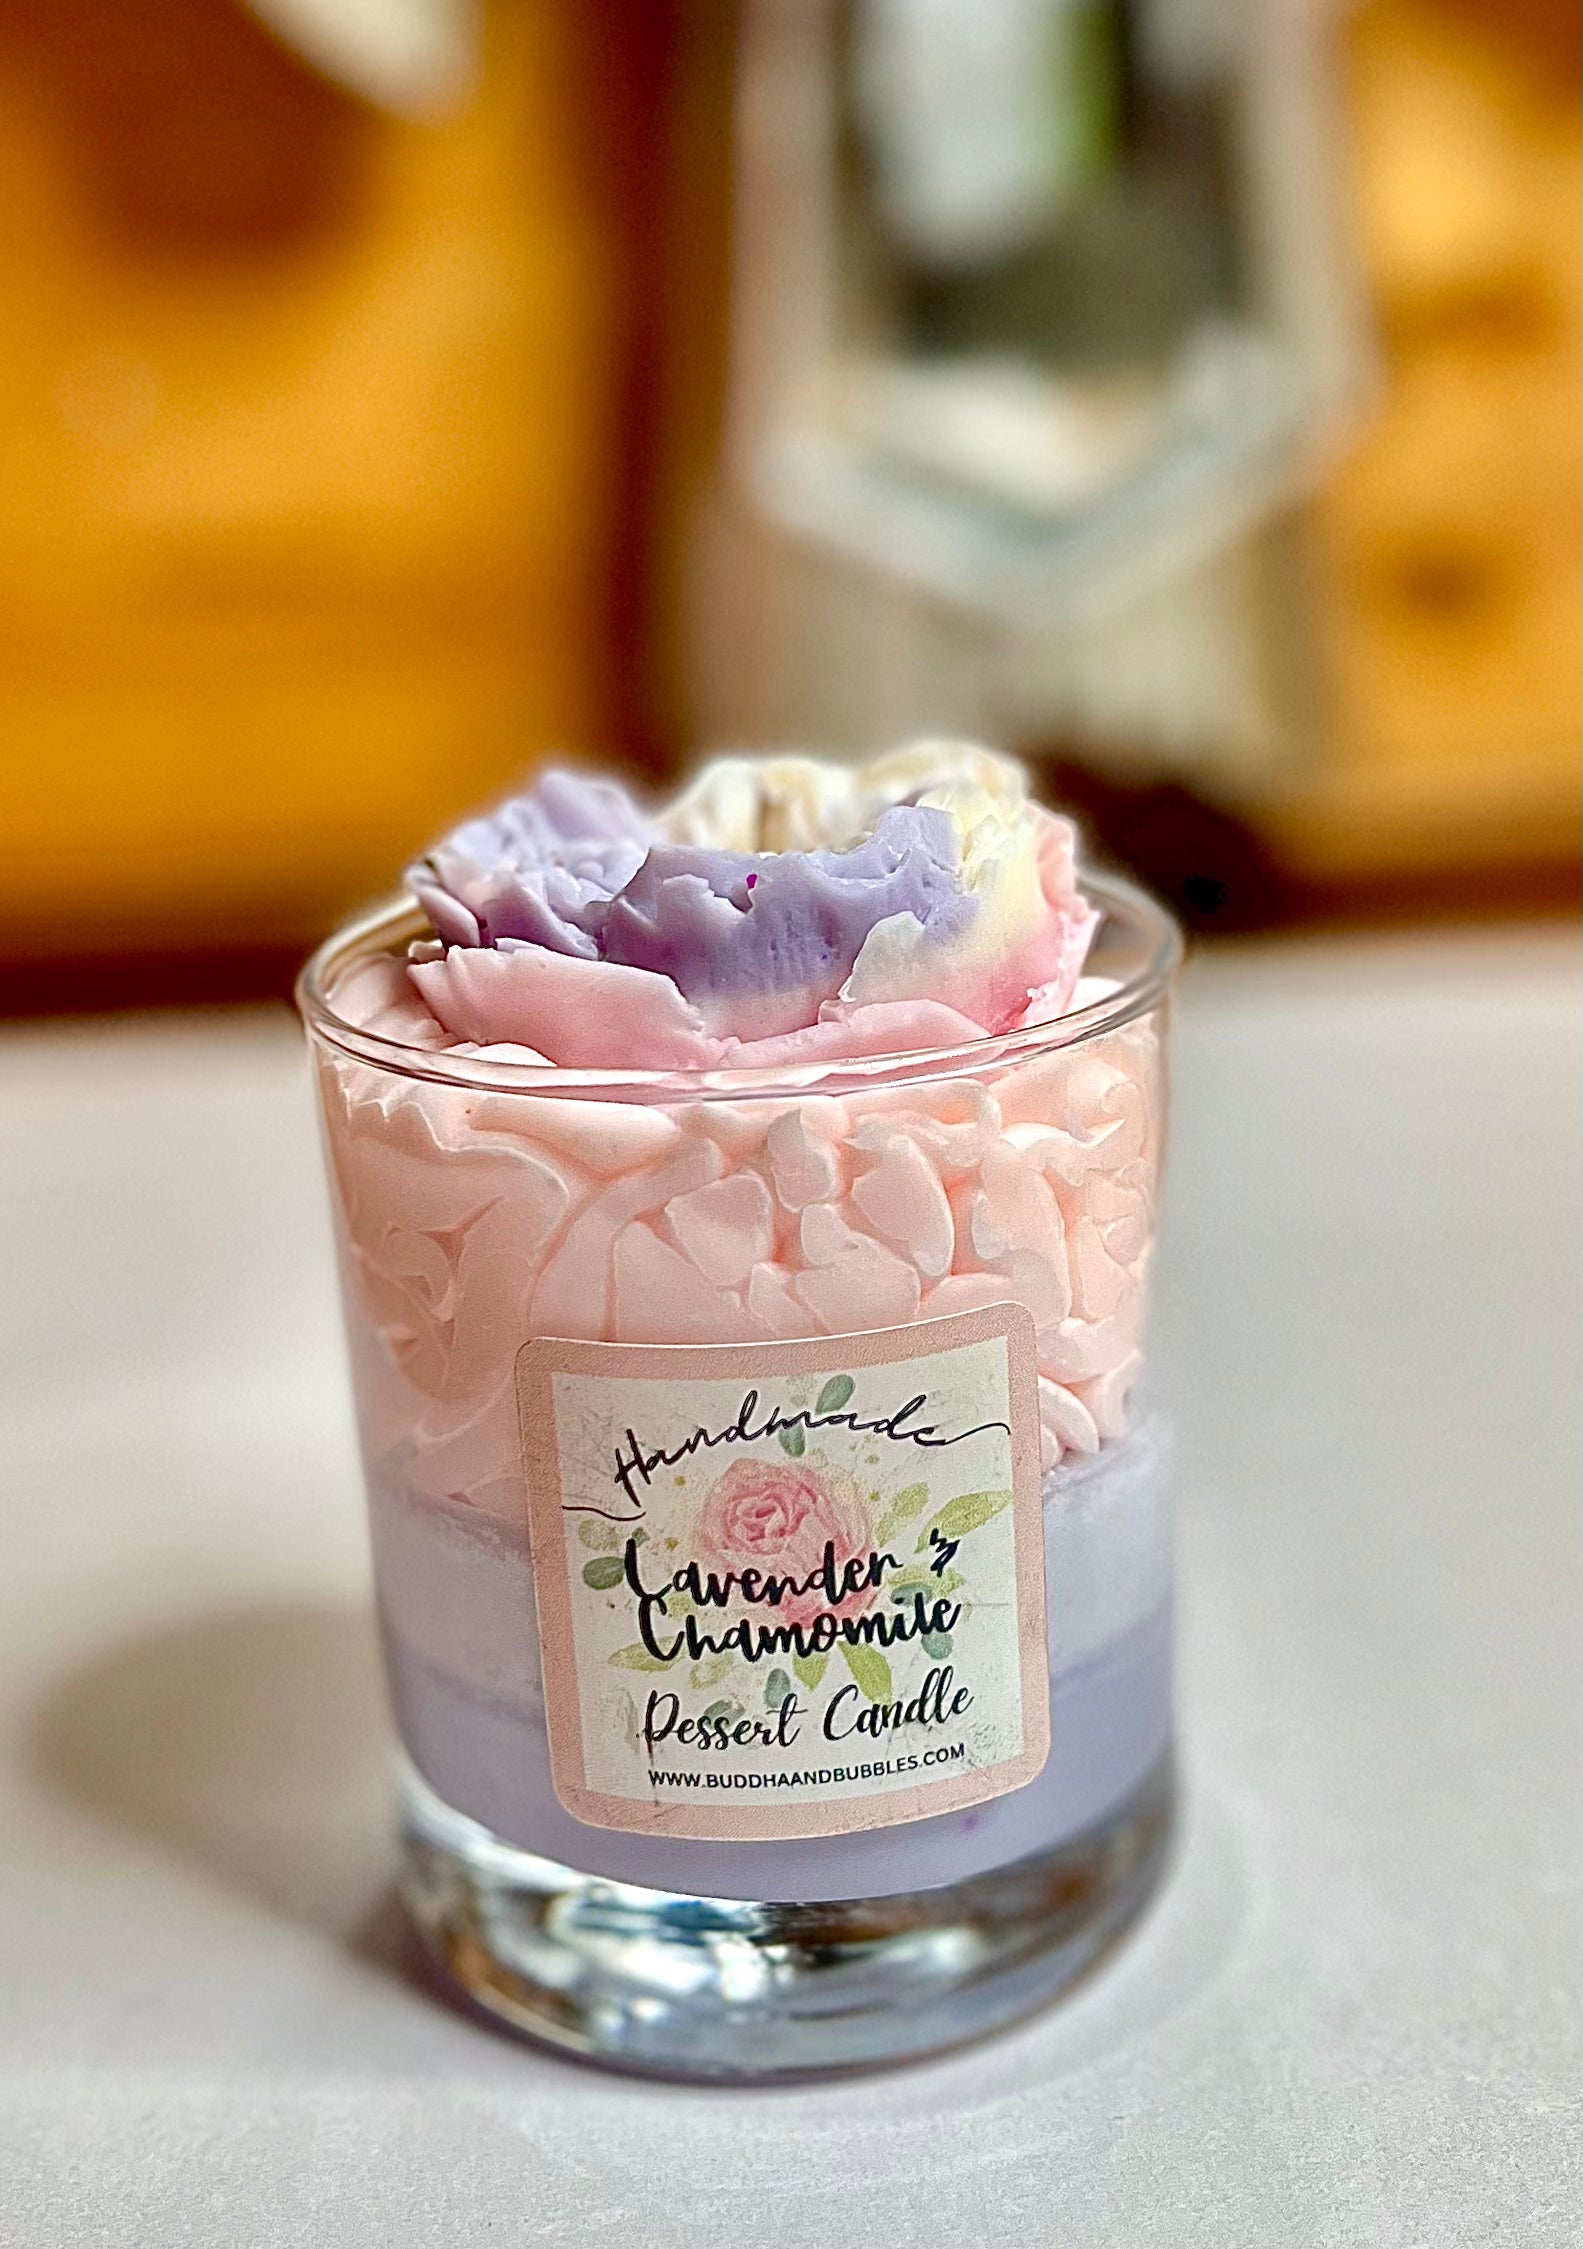 Lily Berries Lavender Luxury Whipped Wax Dessert Candle